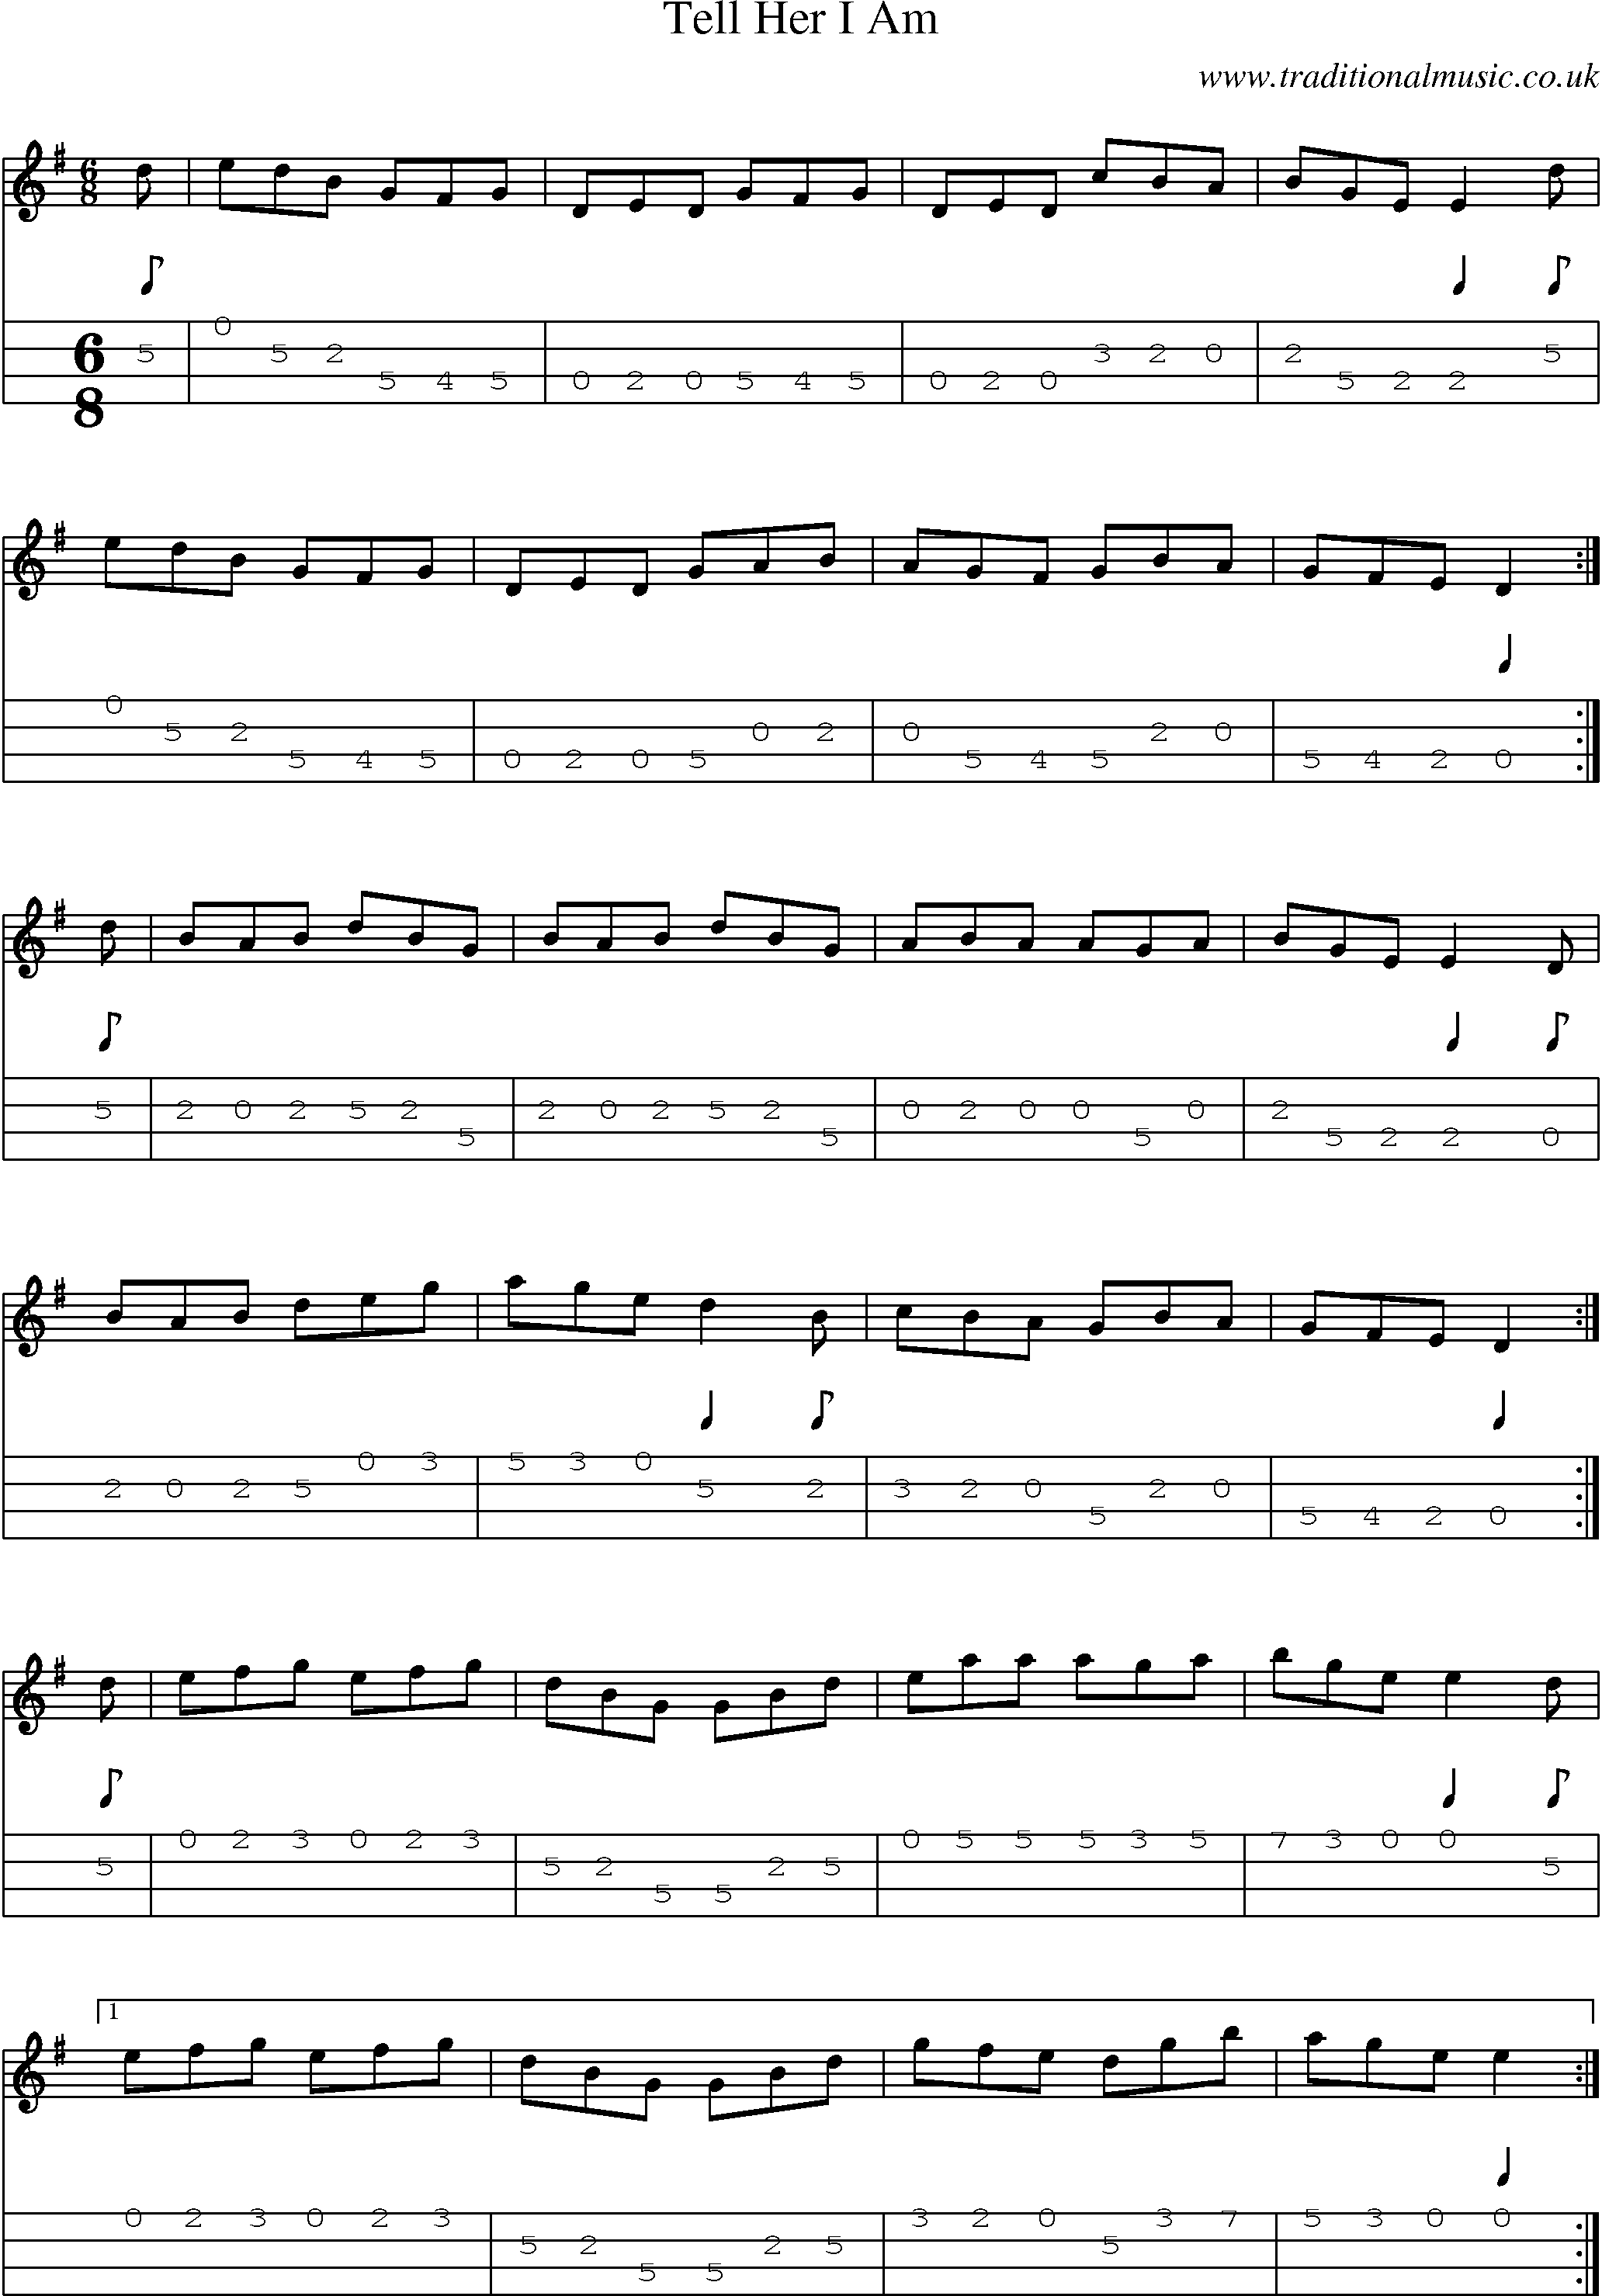 Music Score and Mandolin Tabs for Tell Her I Am